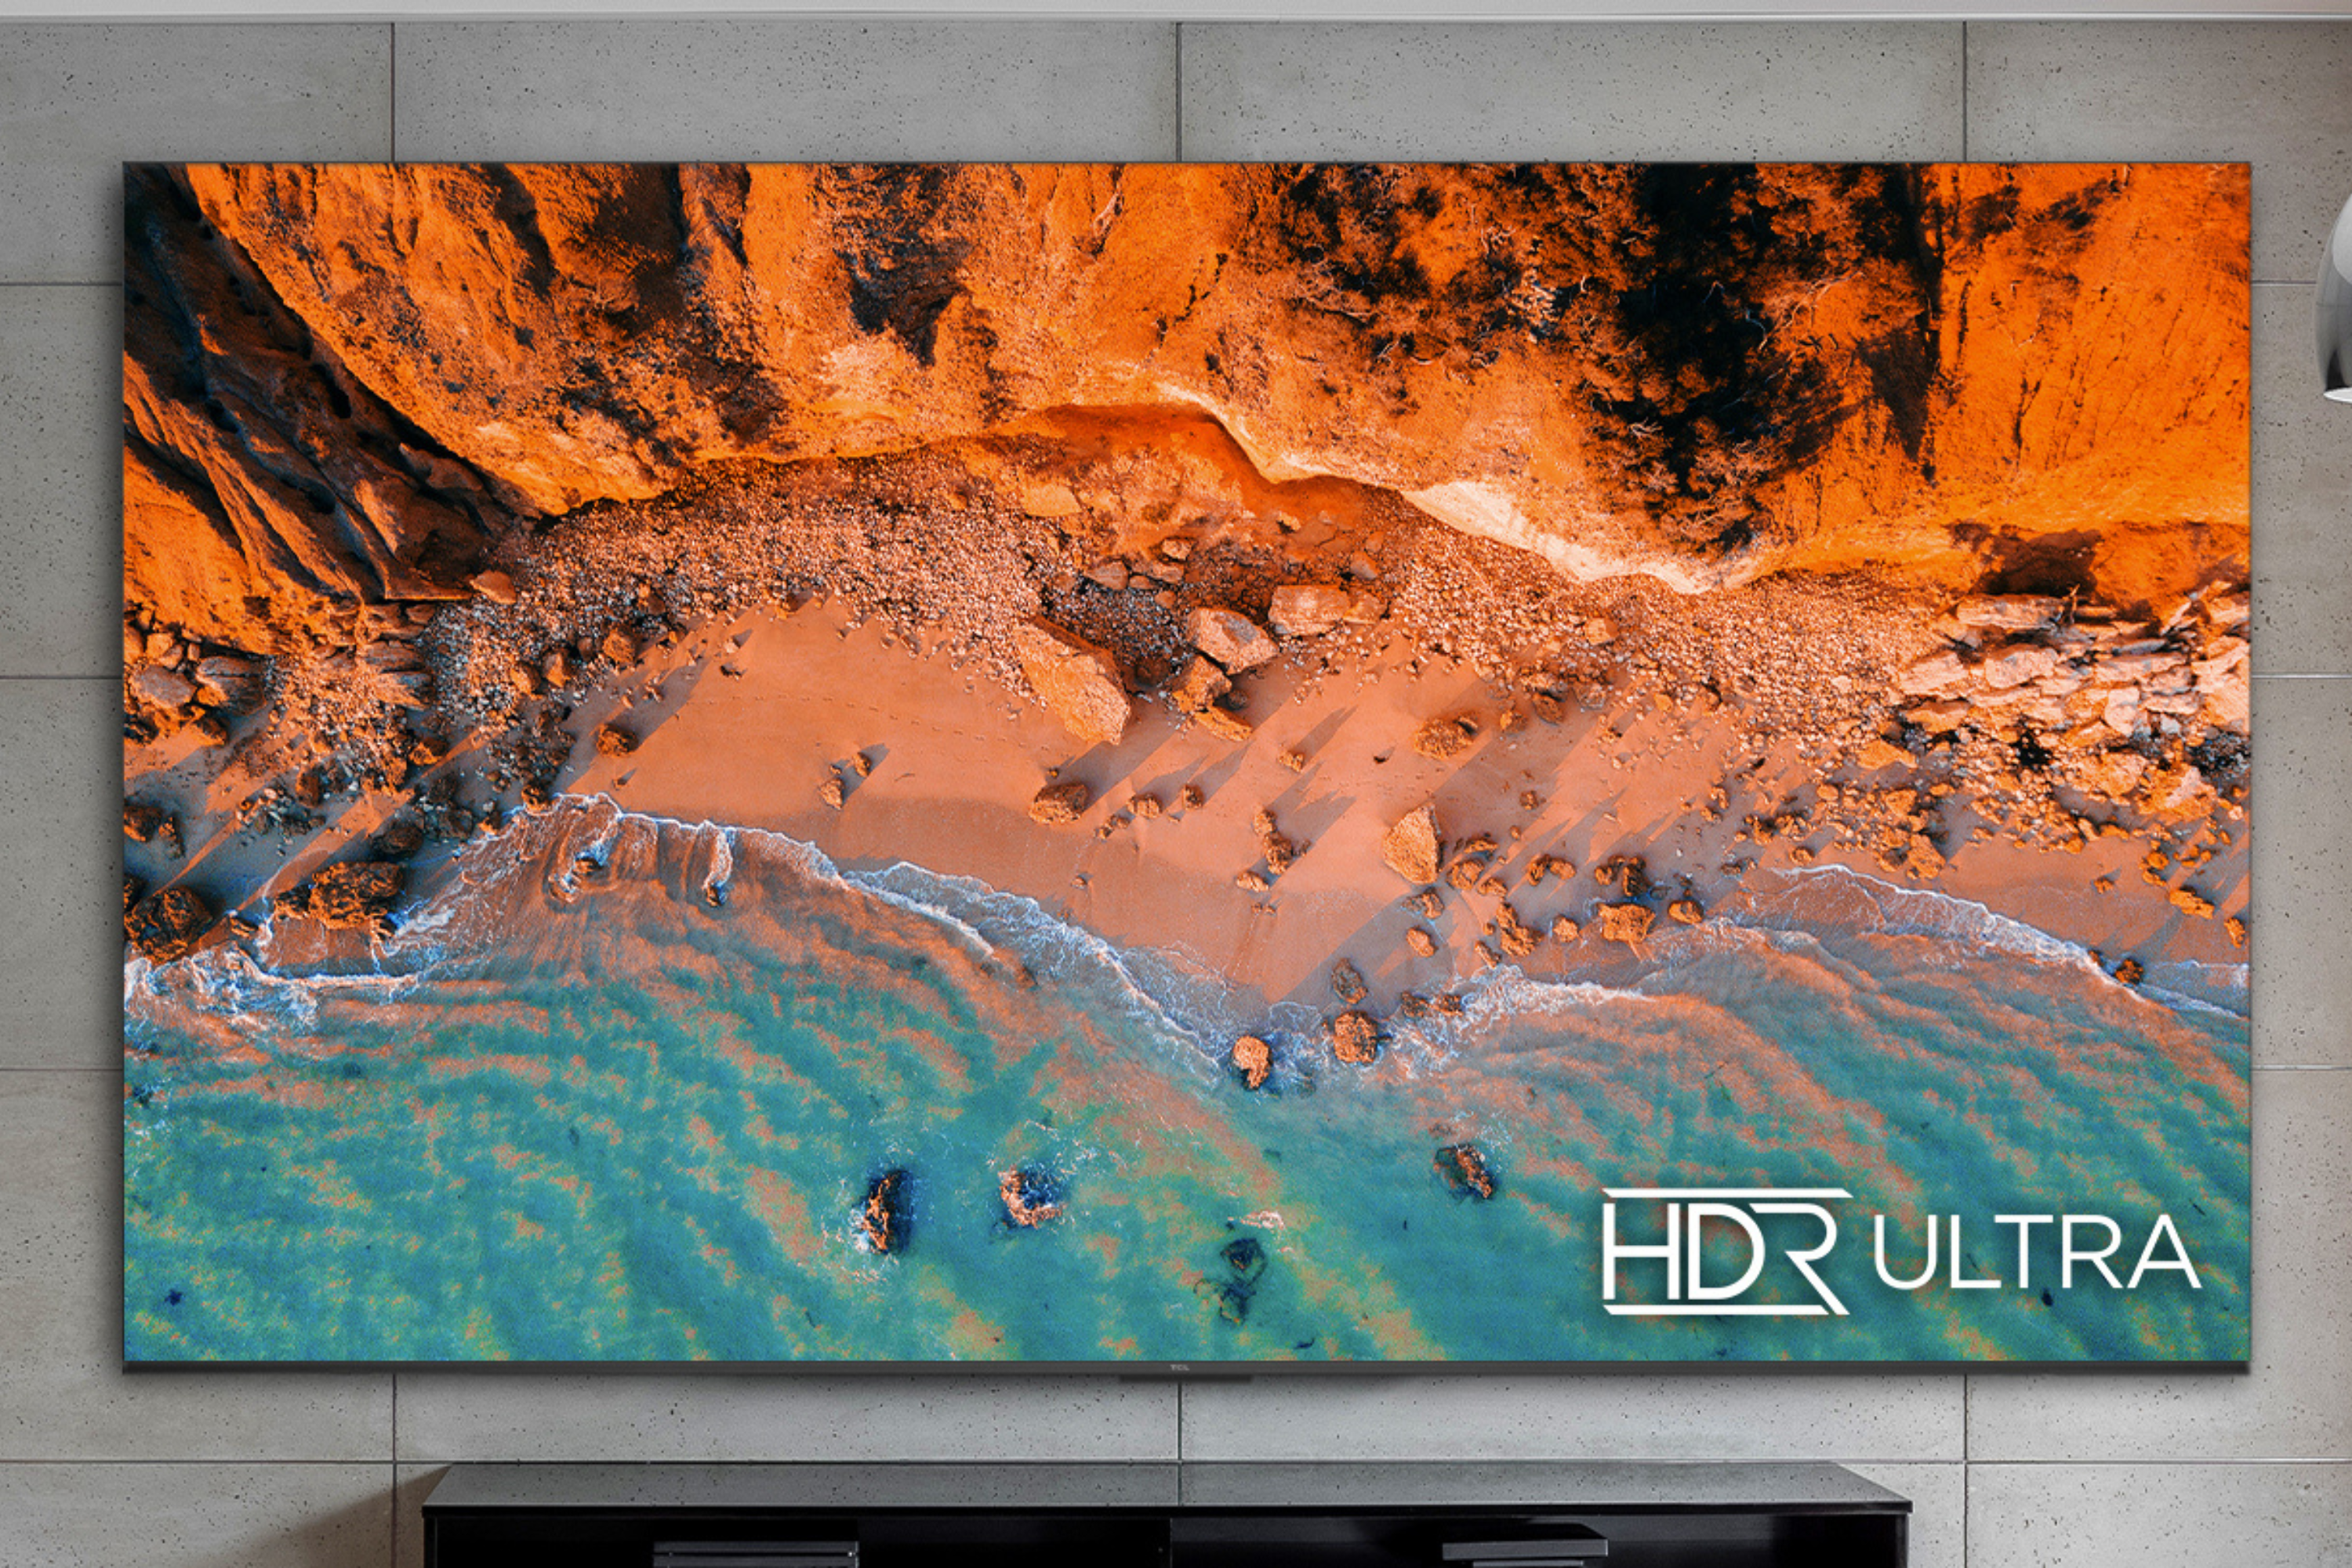 TCL 98-inch Class S5 Series LED 4K UHD Smart Google TV hanging on a wall 